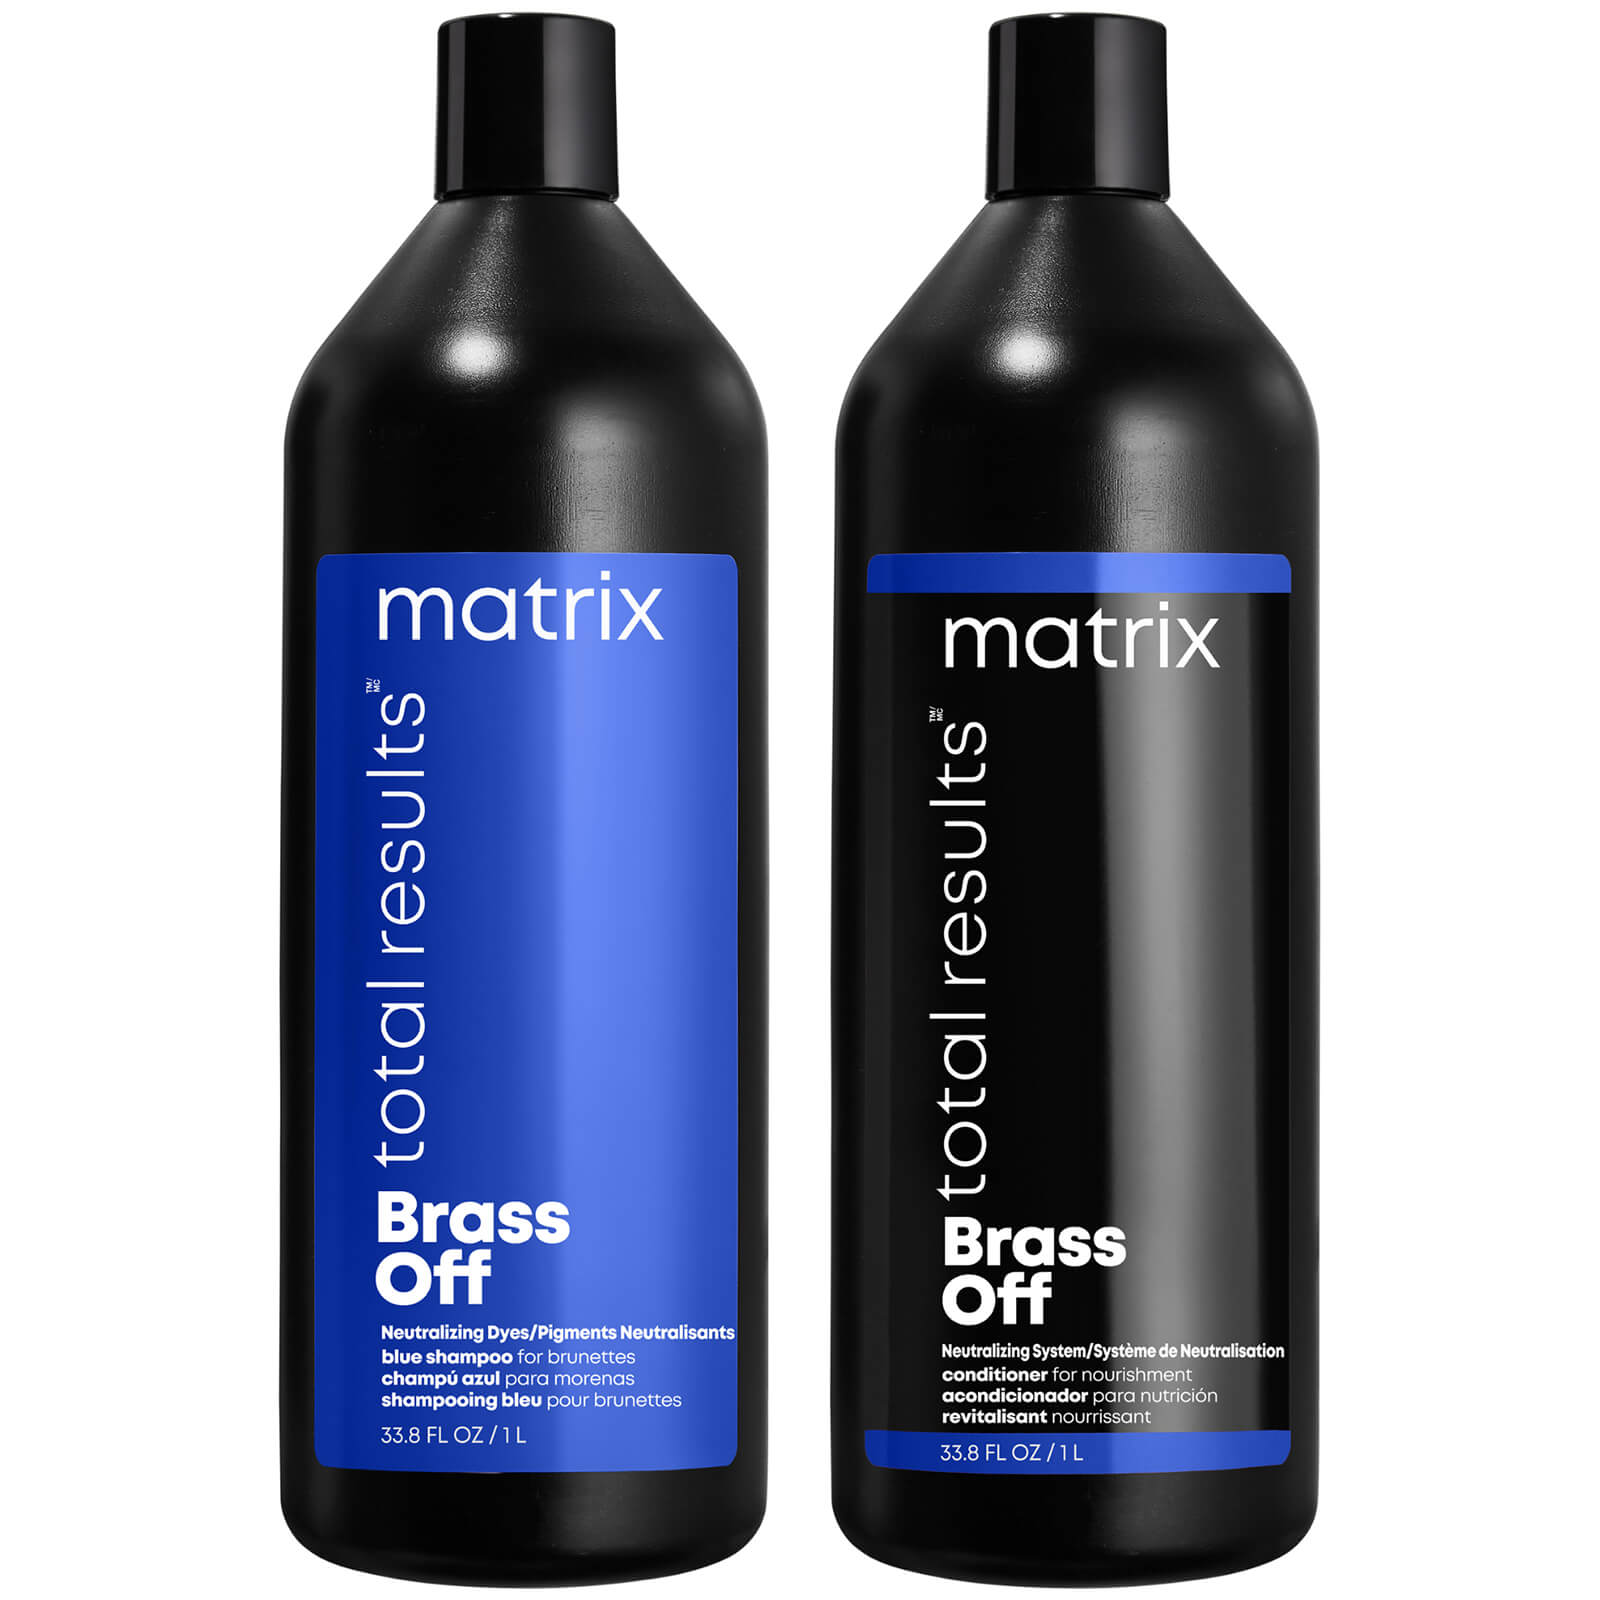 Matrix Brass Off Colour Correcting Blue Anti-Brass Shampoo and Conditioner Duo Set for Lightened Bru